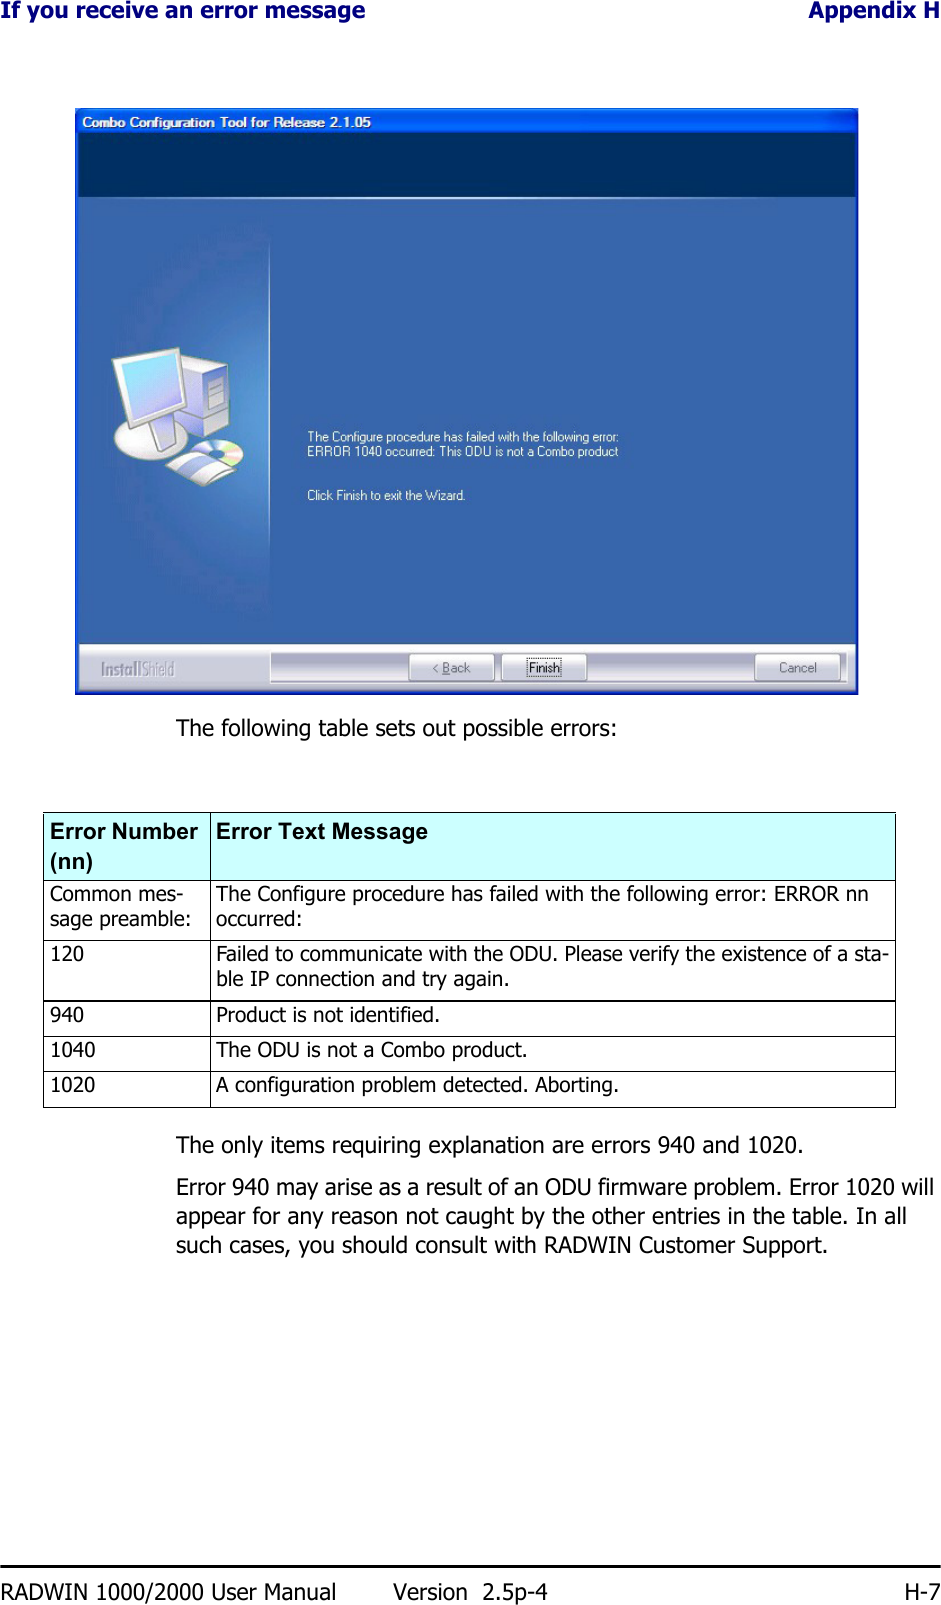 If you receive an error message Appendix HRADWIN 1000/2000 User Manual Version  2.5p-4 H-7The following table sets out possible errors:The only items requiring explanation are errors 940 and 1020.Error 940 may arise as a result of an ODU firmware problem. Error 1020 will appear for any reason not caught by the other entries in the table. In all such cases, you should consult with RADWIN Customer Support.Error Number (nn)Error Text MessageCommon mes-sage preamble: The Configure procedure has failed with the following error: ERROR nn occurred:120 Failed to communicate with the ODU. Please verify the existence of a sta-ble IP connection and try again.940 Product is not identified.1040 The ODU is not a Combo product.1020 A configuration problem detected. Aborting.